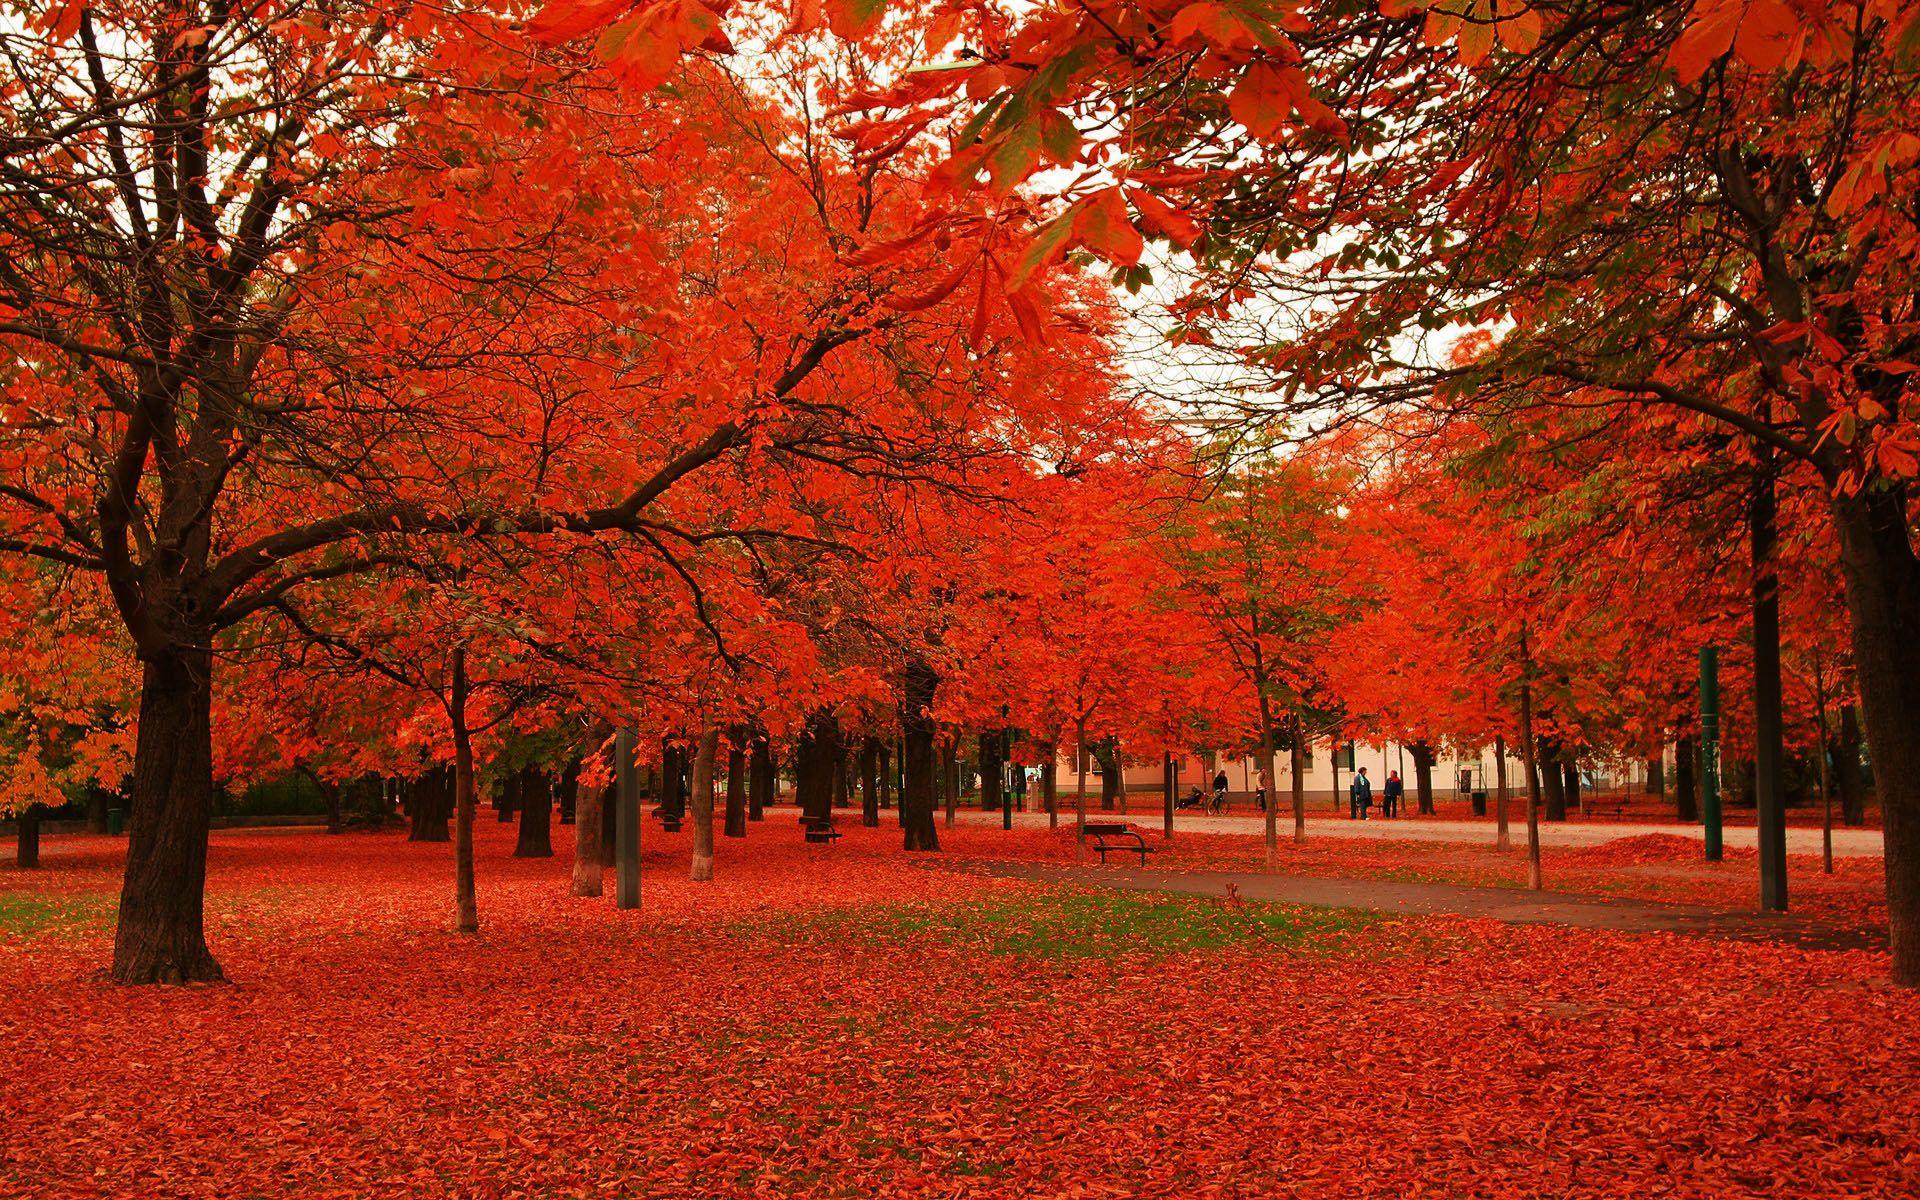 autumn trees and leaves. Red leaves autumn trees Desktop Wallpaper